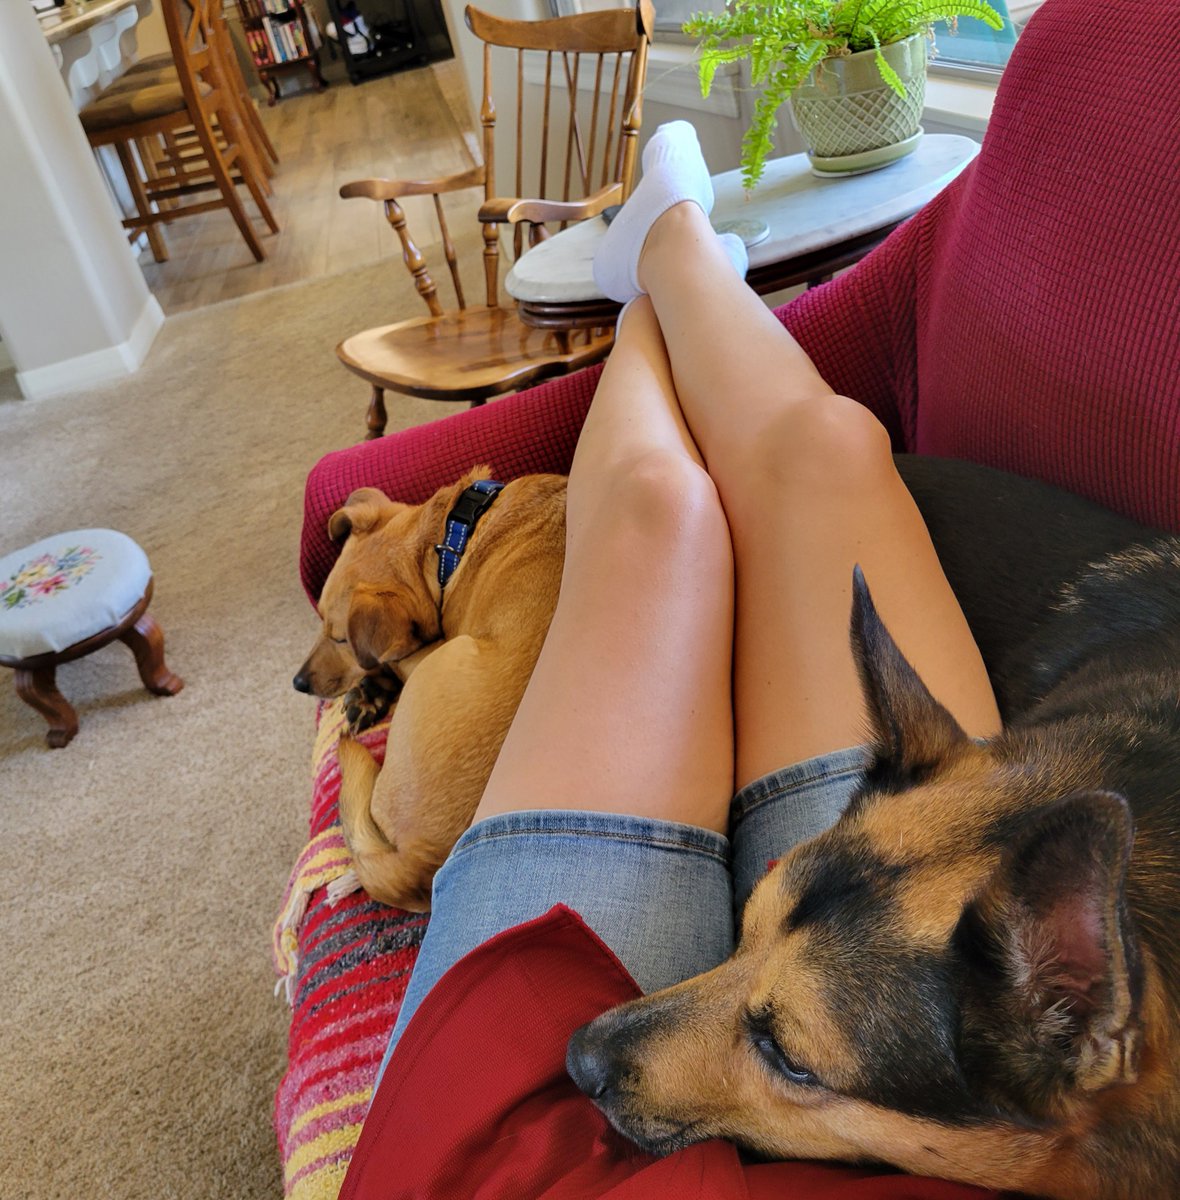 It may be 115 degrees in Phoenix today, but it’s never too hot for #dogcuddles on the couch while #reading a good book.  #authorsoftwitter #fortheloveofreading #books  #authordogs #rescuedogs #rescuedogsoftwitter